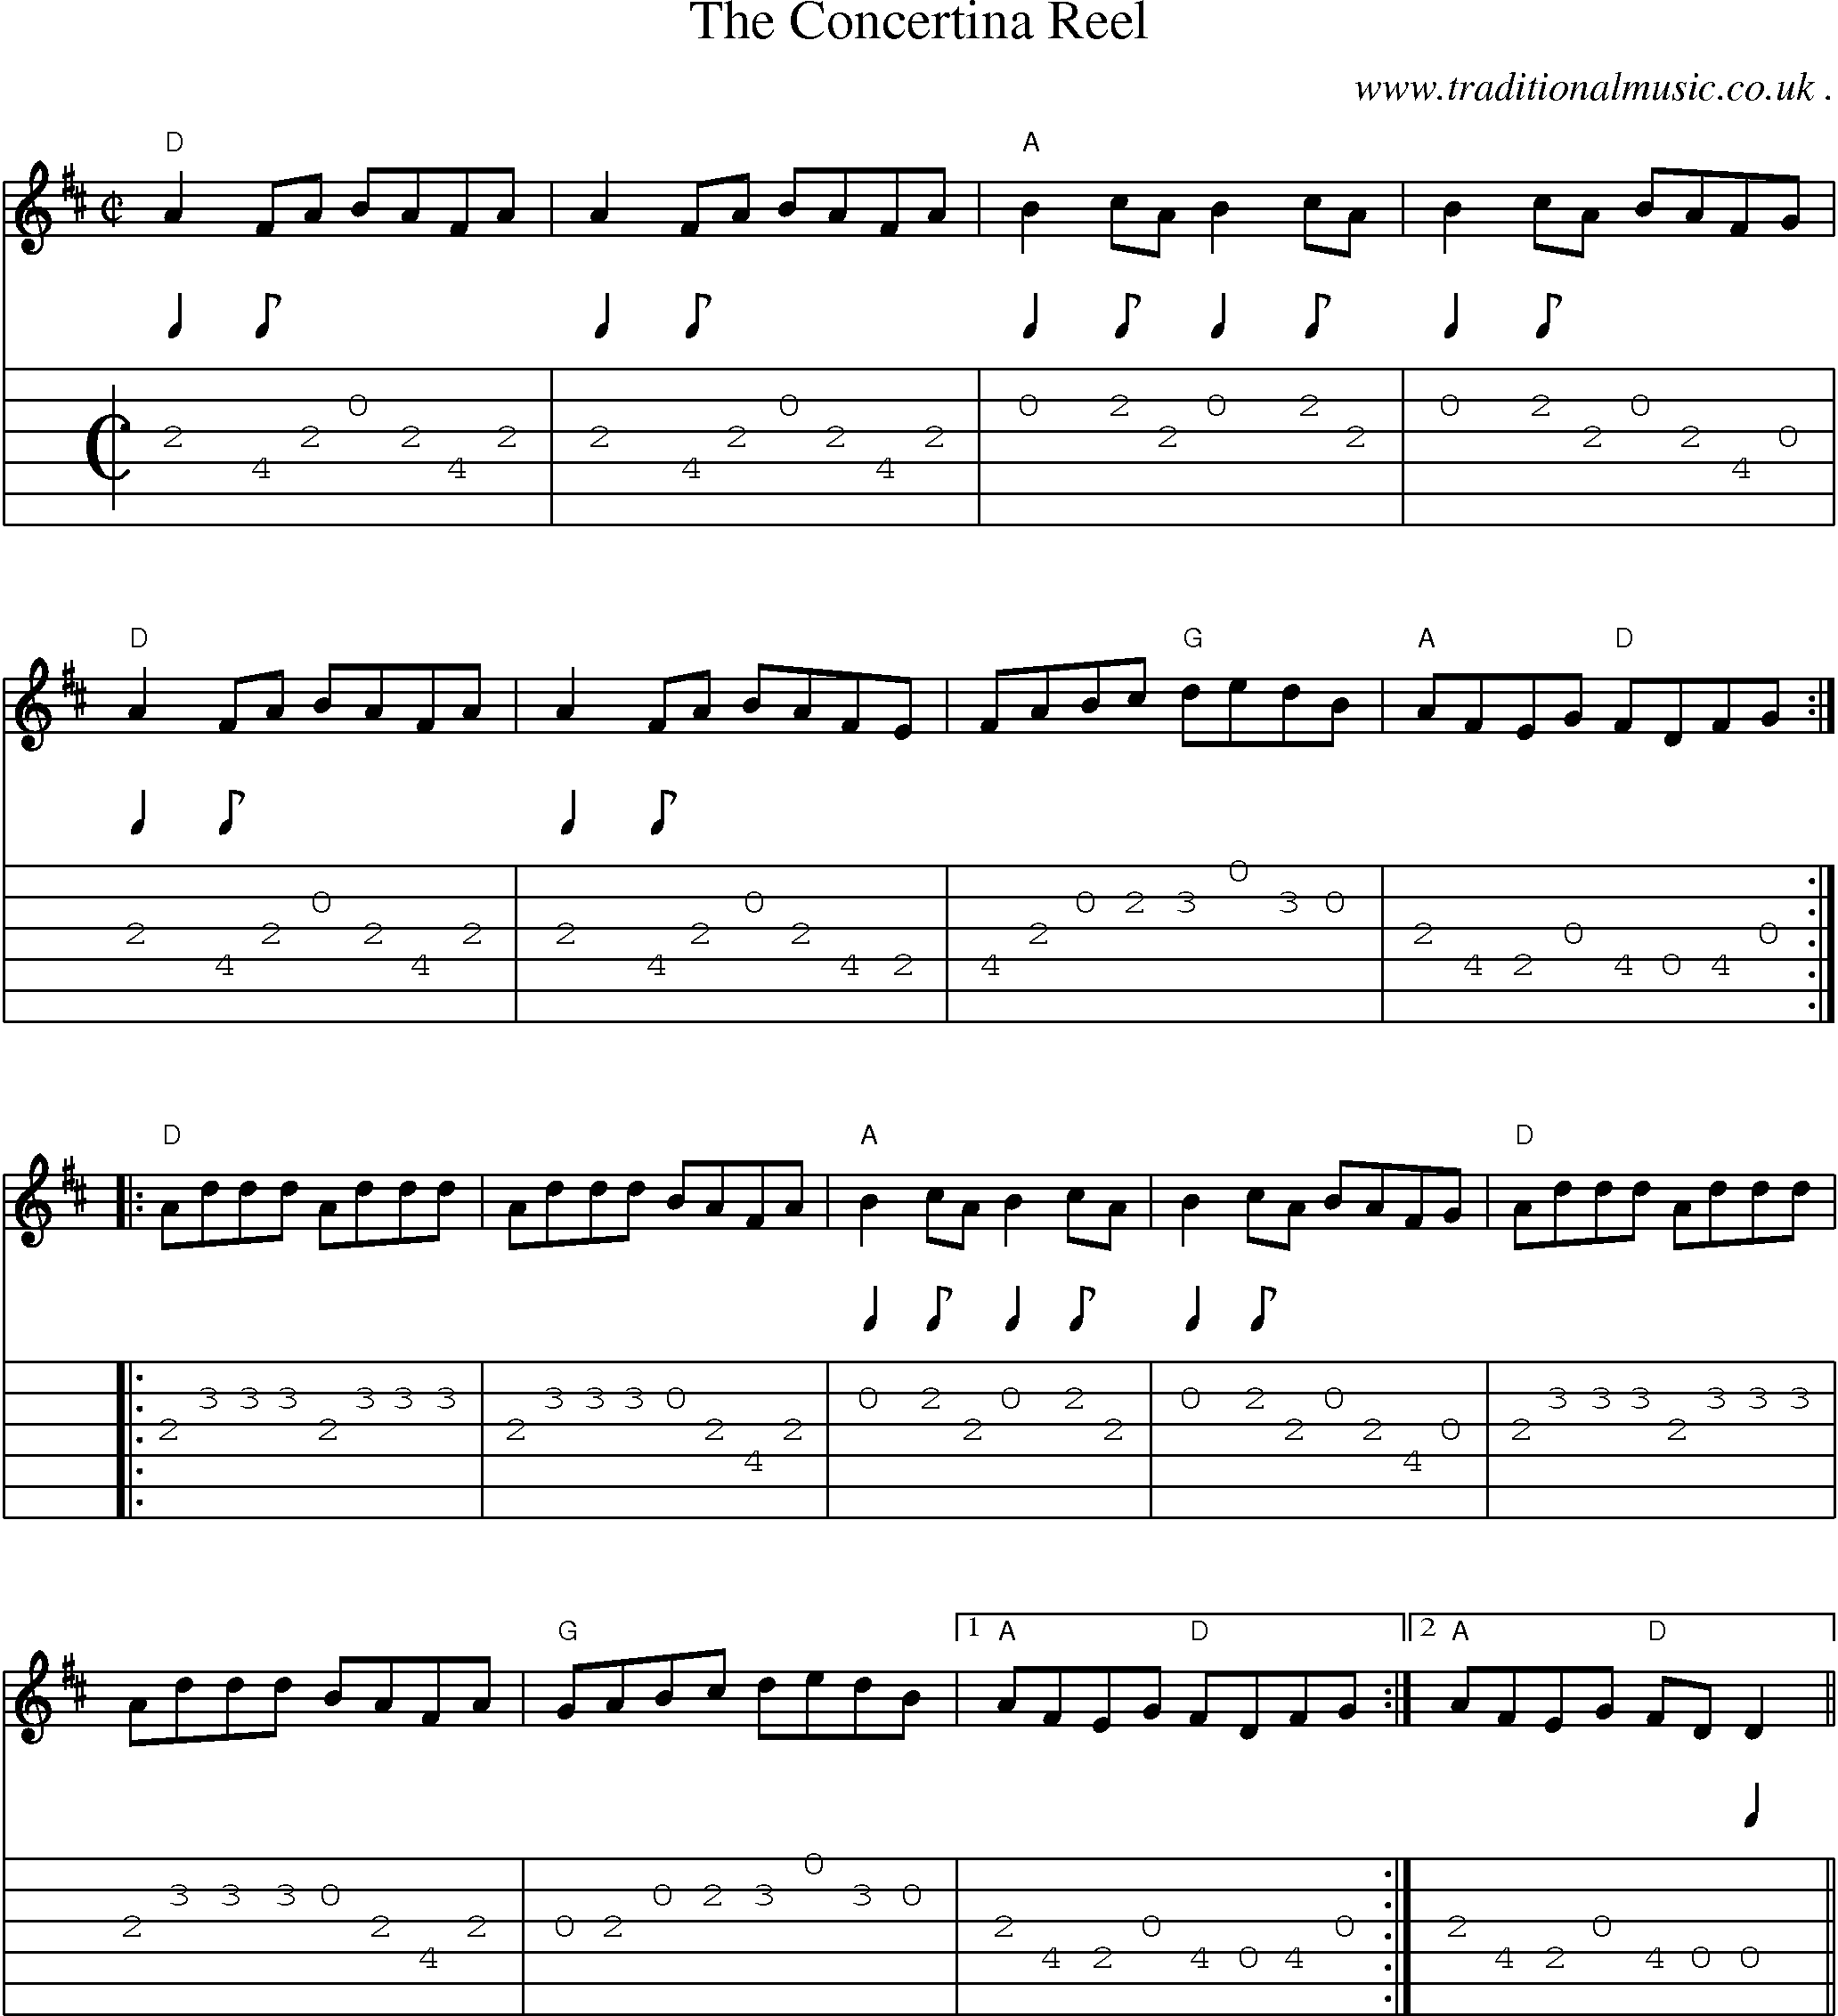 Music Score and Guitar Tabs for The Concertina Reel